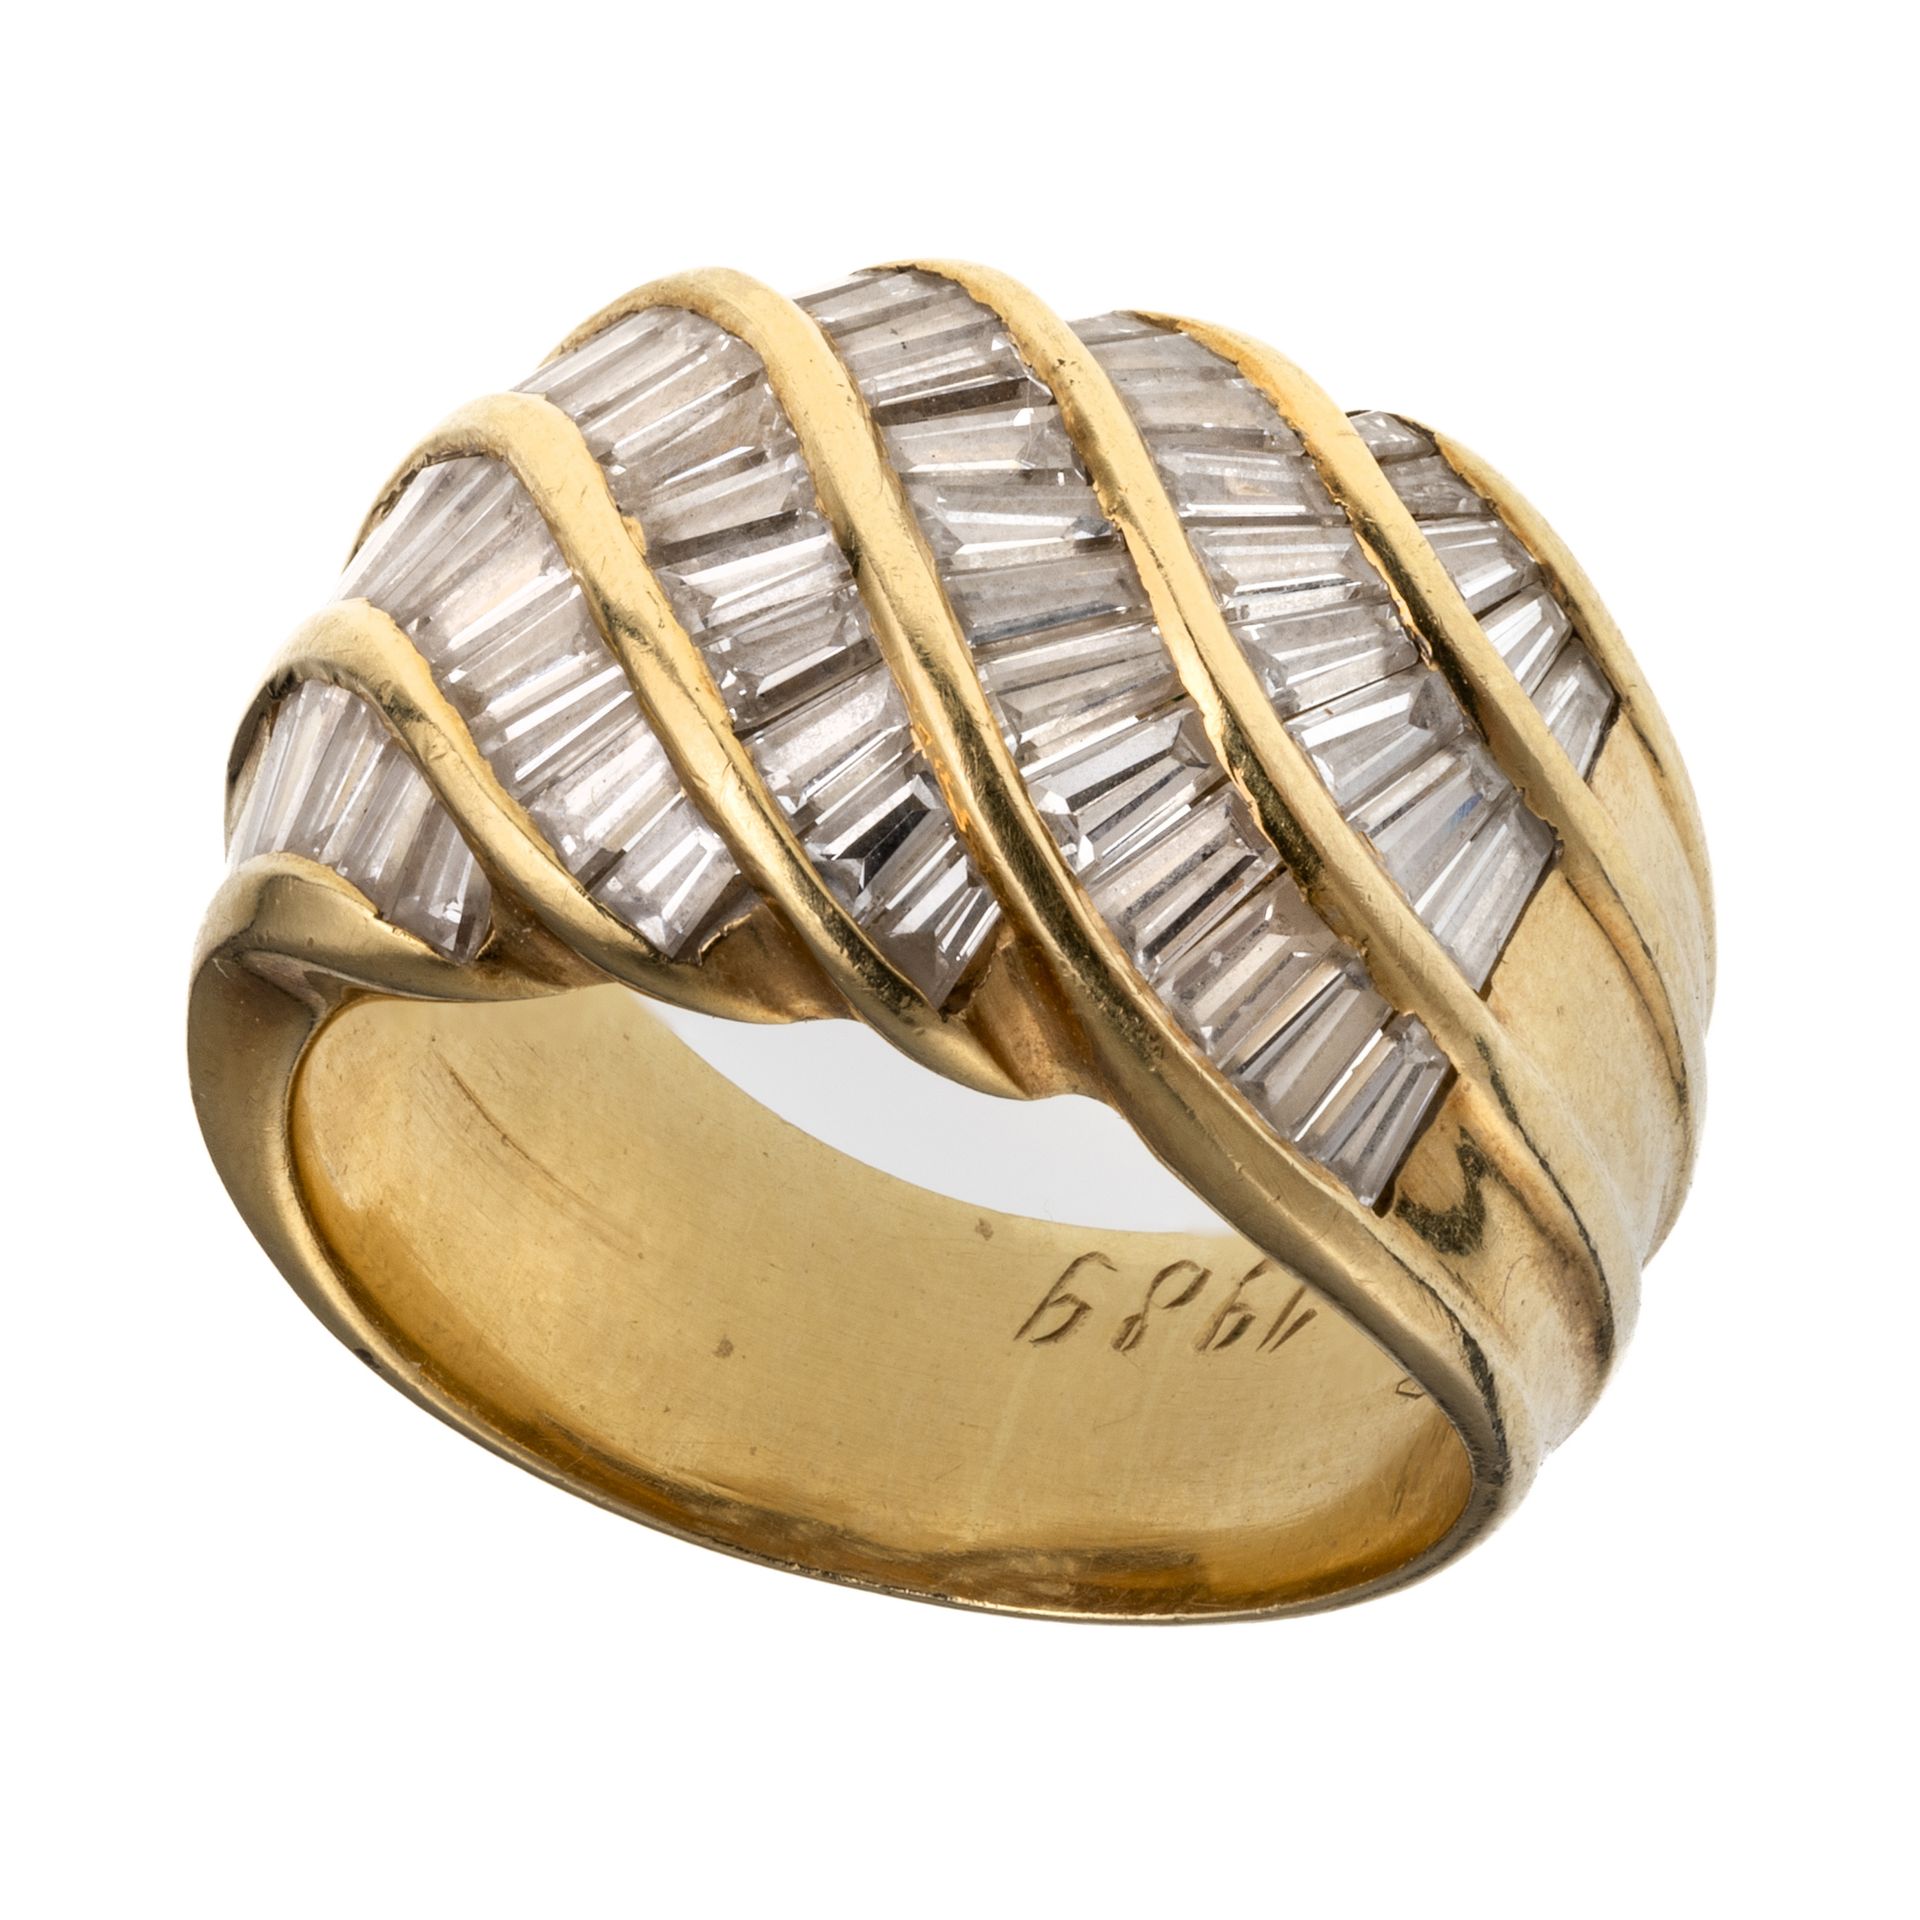 GOLD RING WITH DIAMONDS